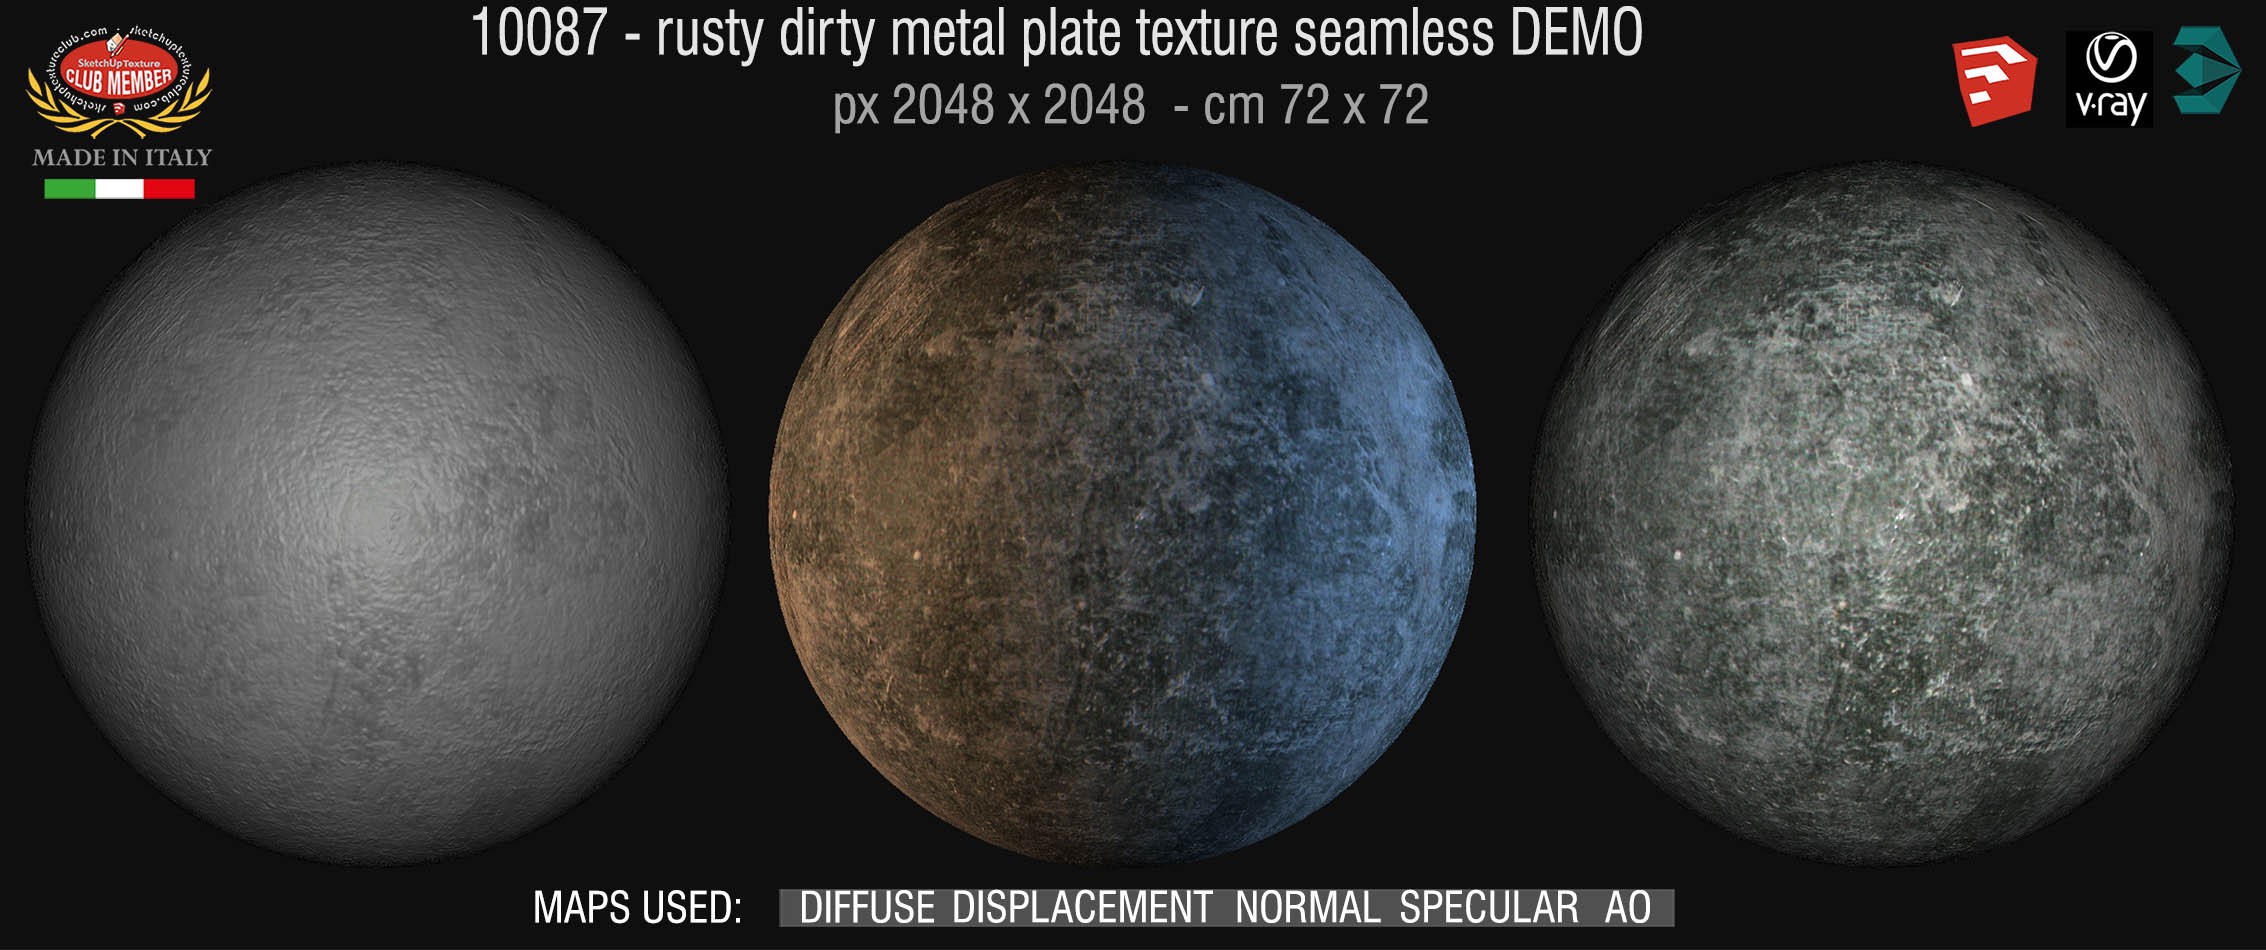 10087 HR  Old dirty metal texture seamless + maps DEMO